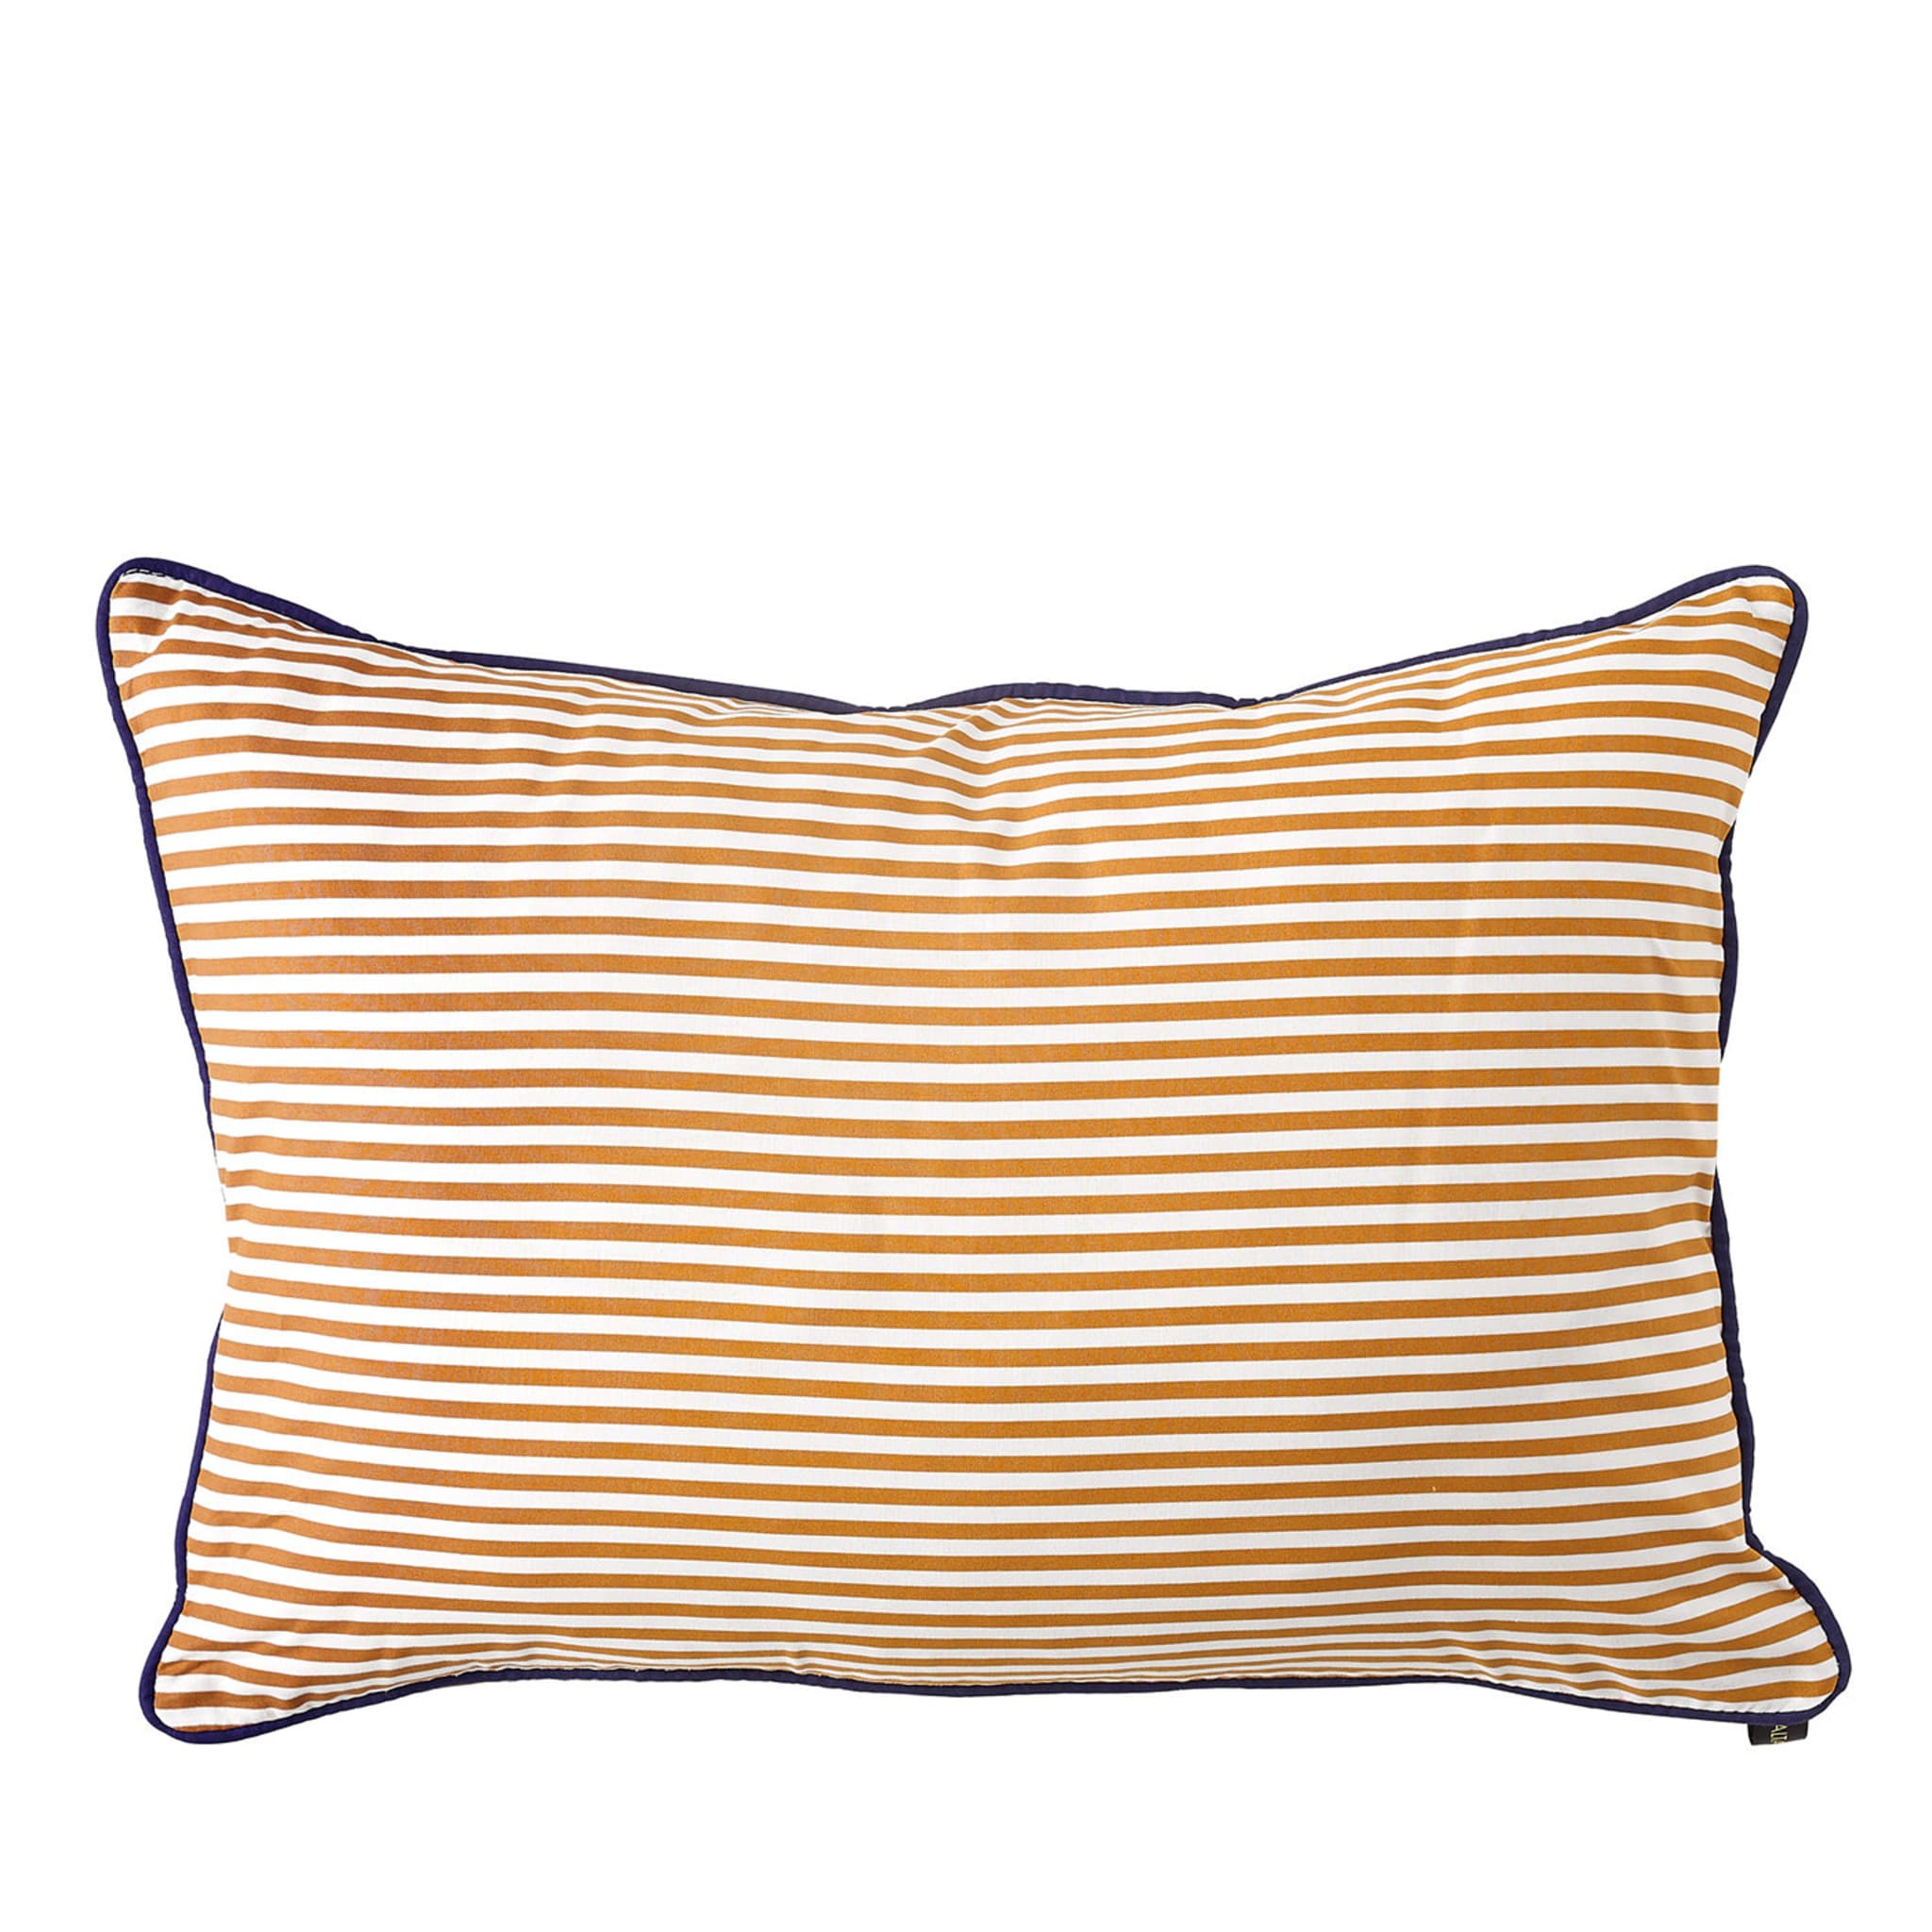 CT 03 Rectangular Striped Pillow in Caramel and White - Main view